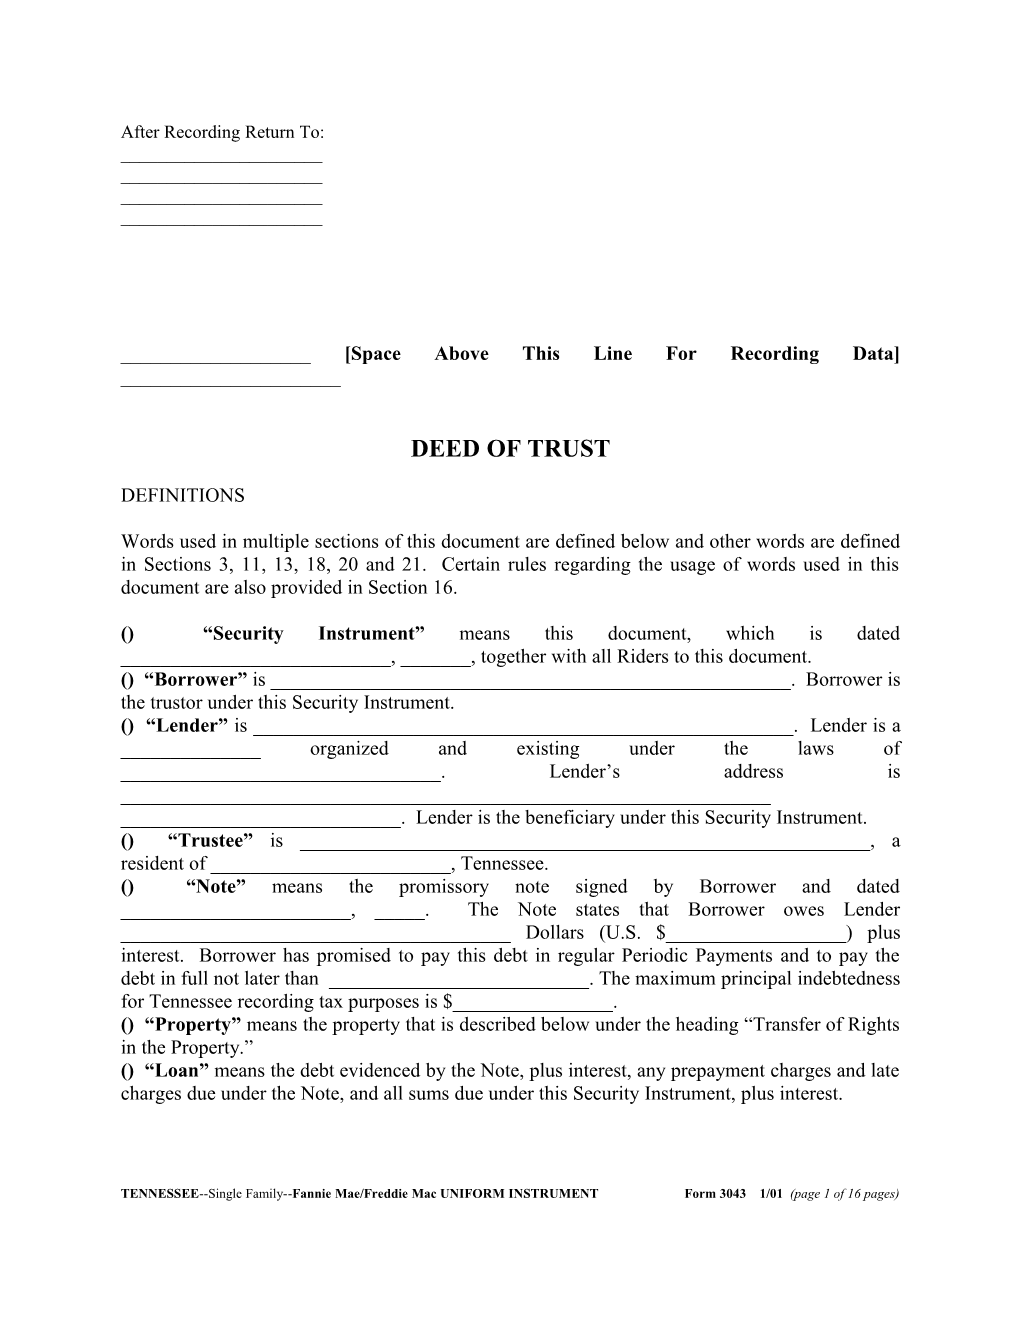 Tennessee Security Instrument (Form 3043): PDF